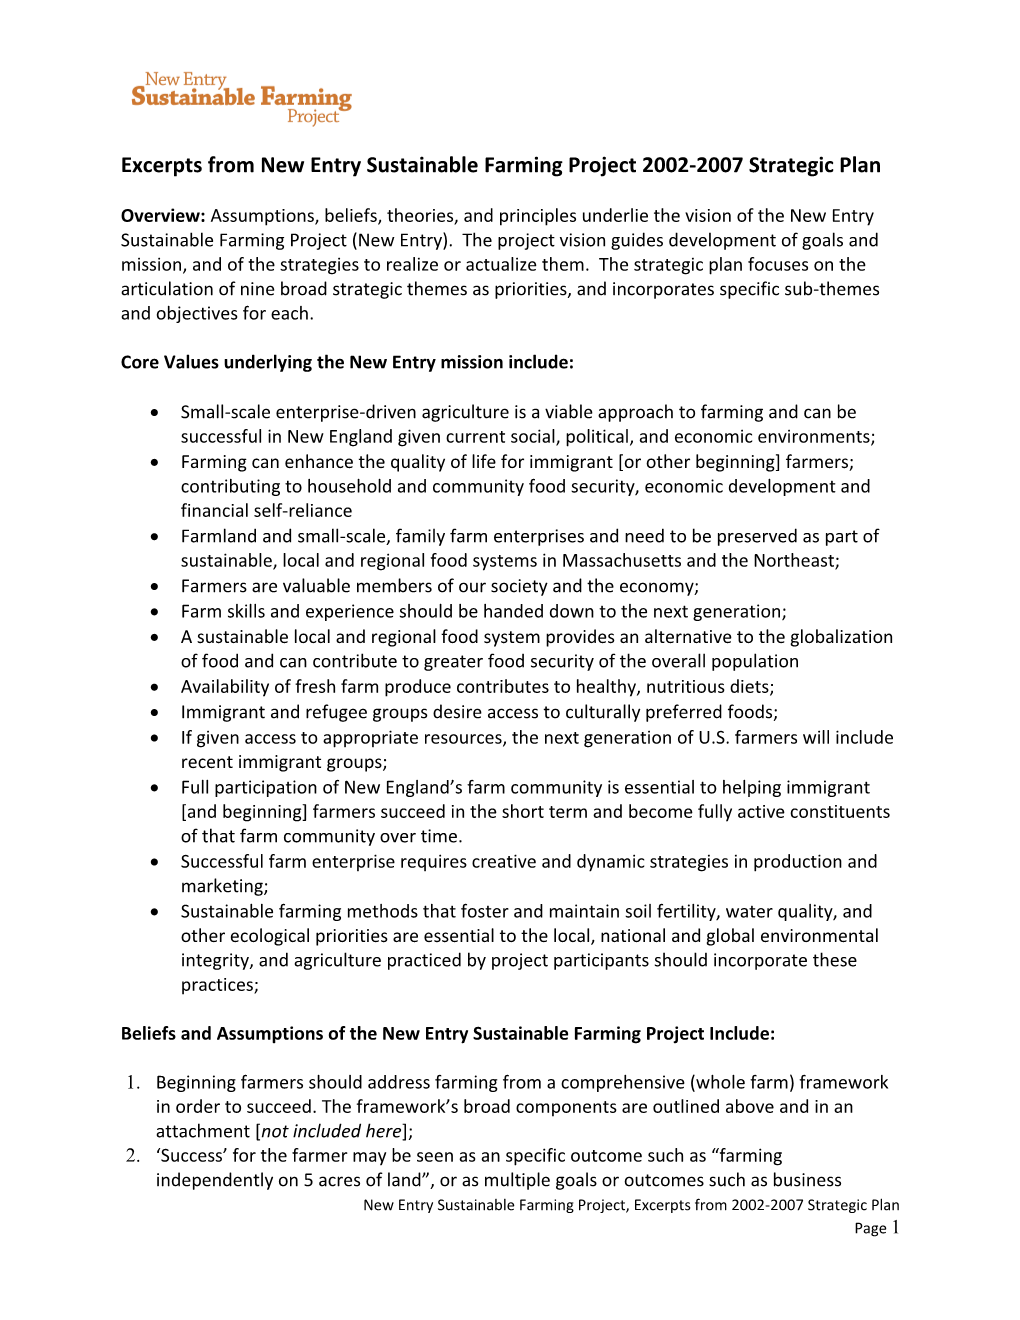 Excerpts from New Entry Sustainable Farming Project 2002-2007 Strategic Plan